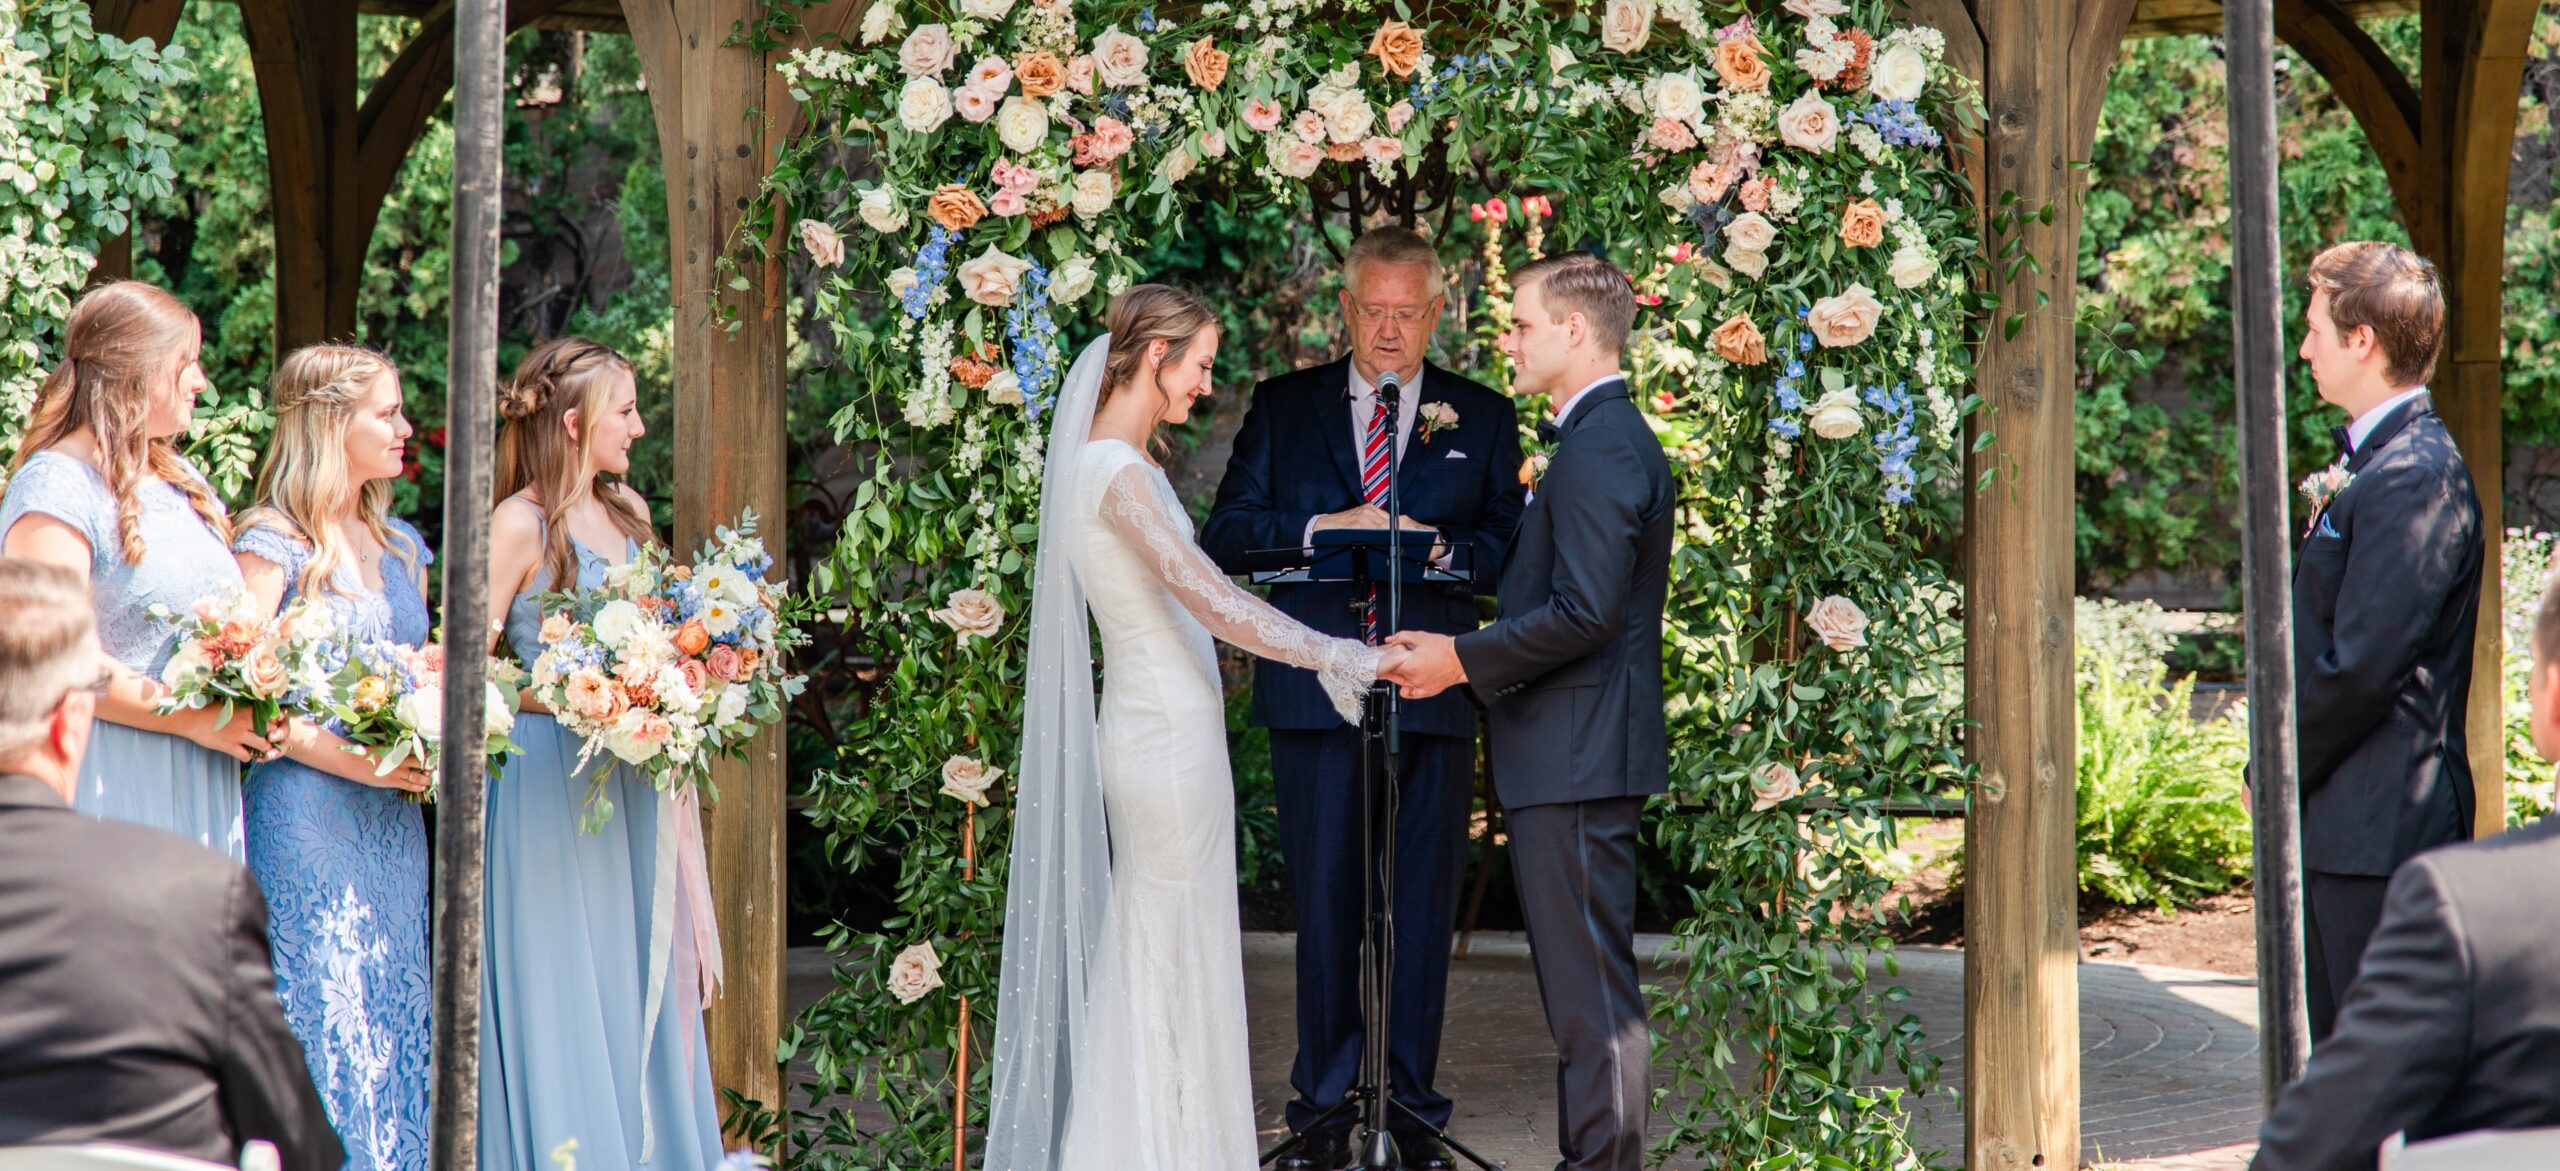 wedding ceremony with floral backdrop